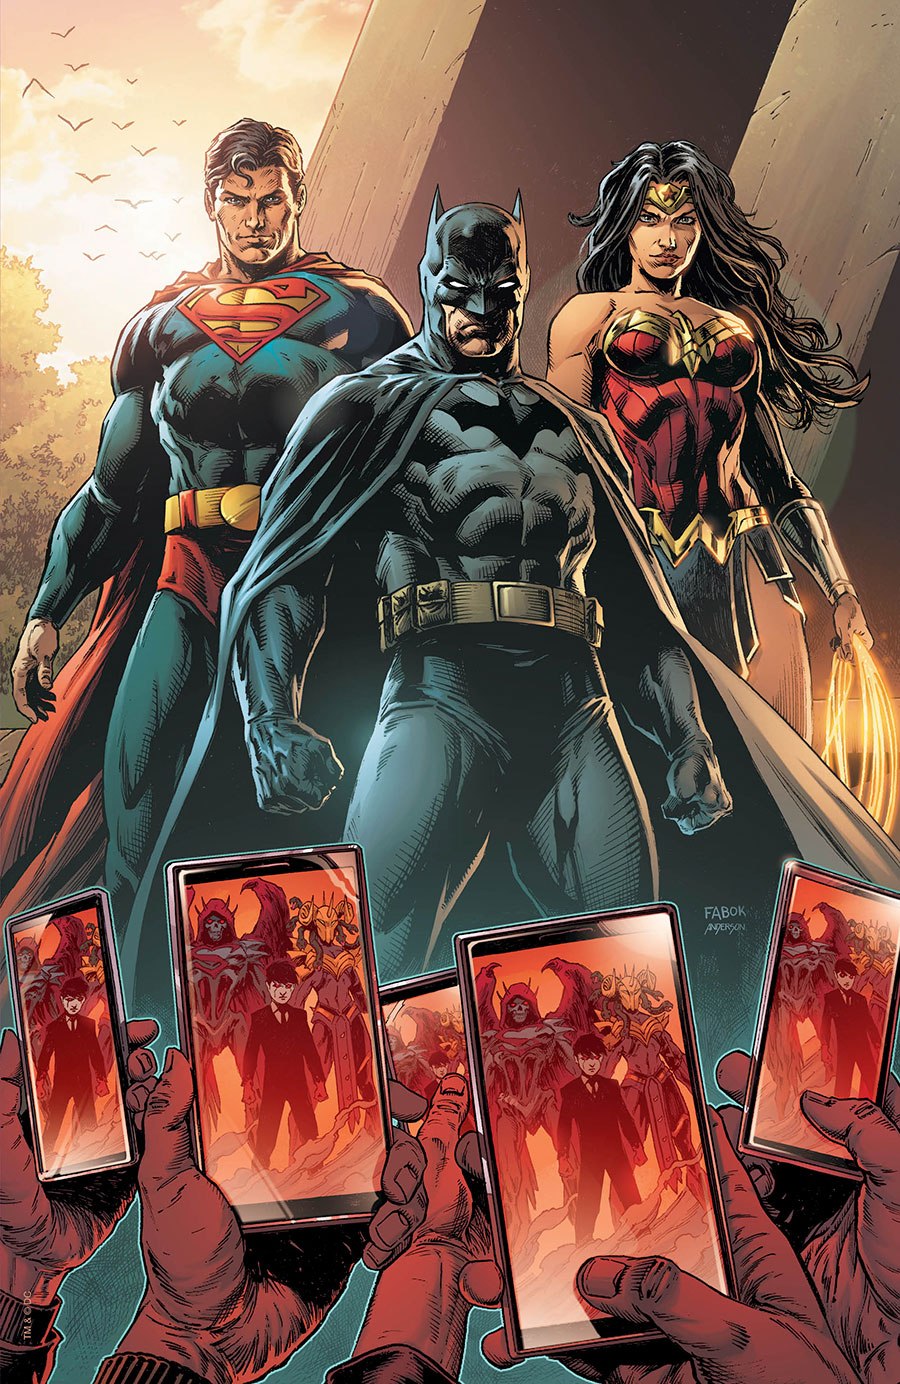 SCOOP: DC Has 3 Free Comic Book Day Titles Including Dawn Of DC